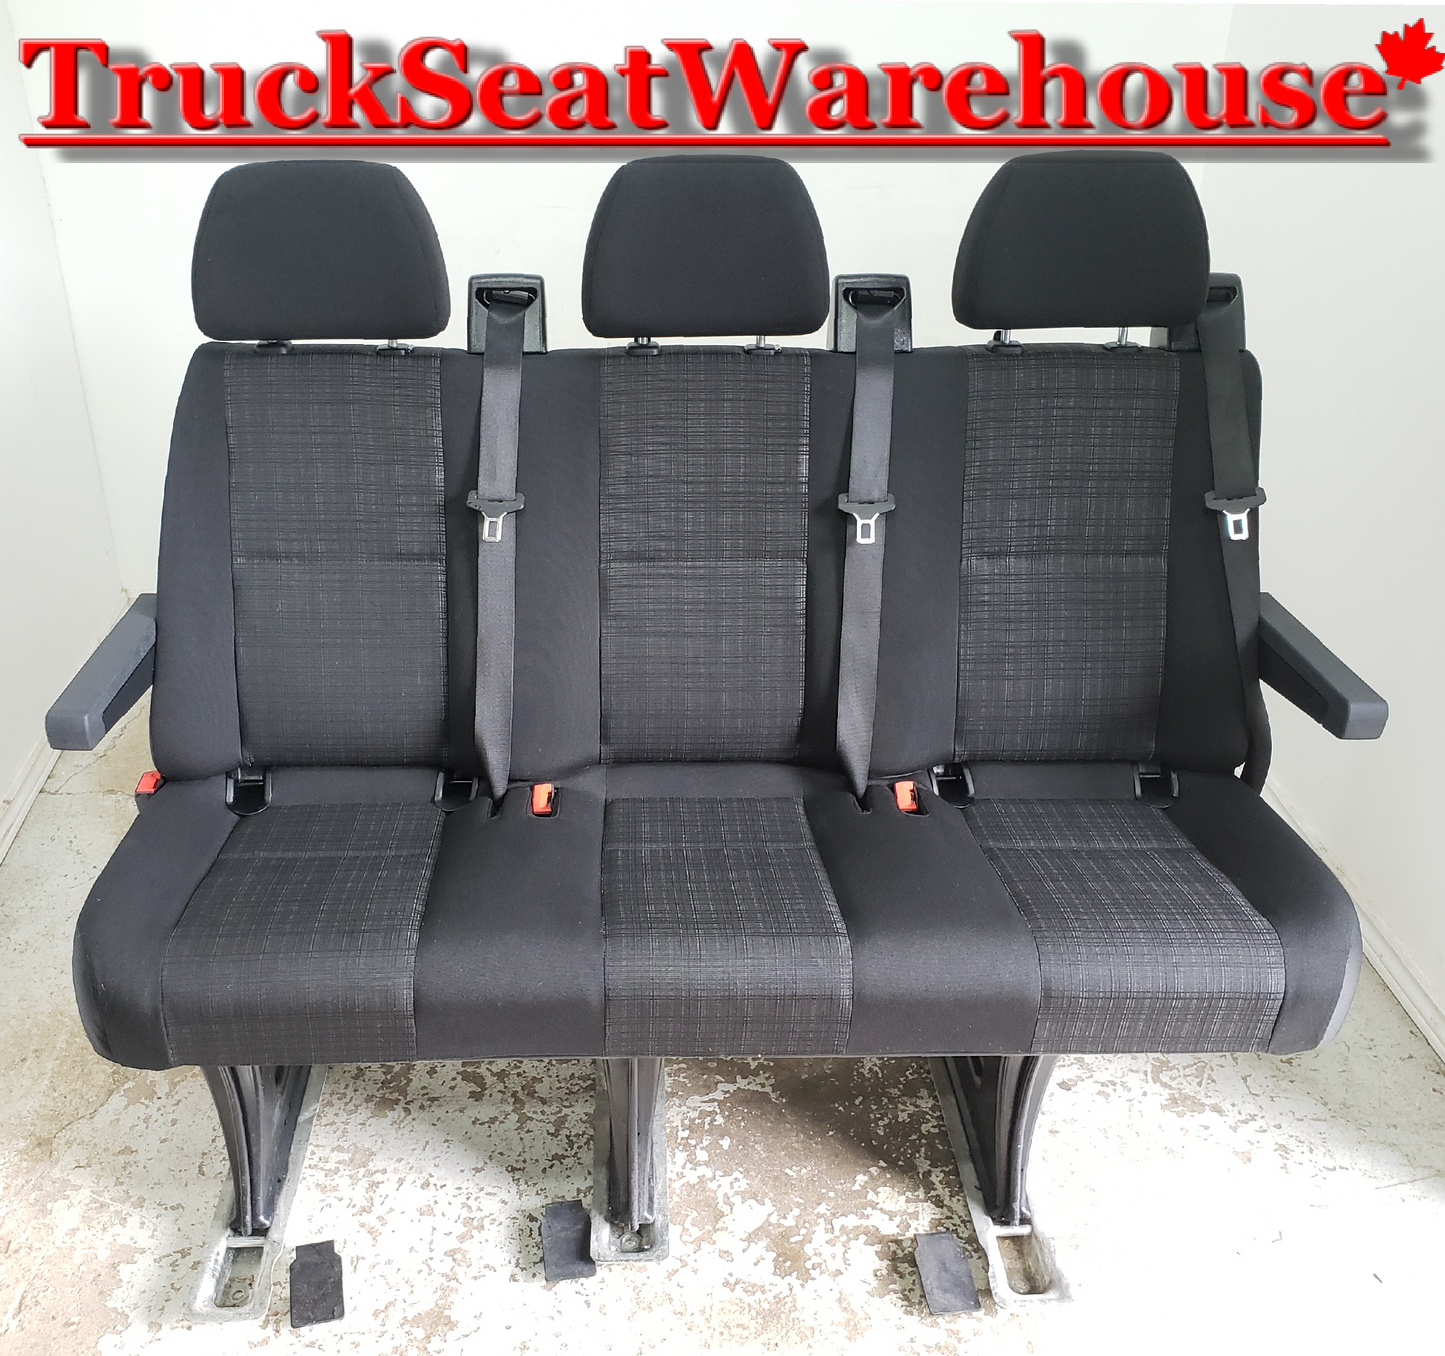 Black cloth 3 position bench seat from a 2014 Chrysler Sprinter Mercedes Passenger Van. removable quick release cargo 